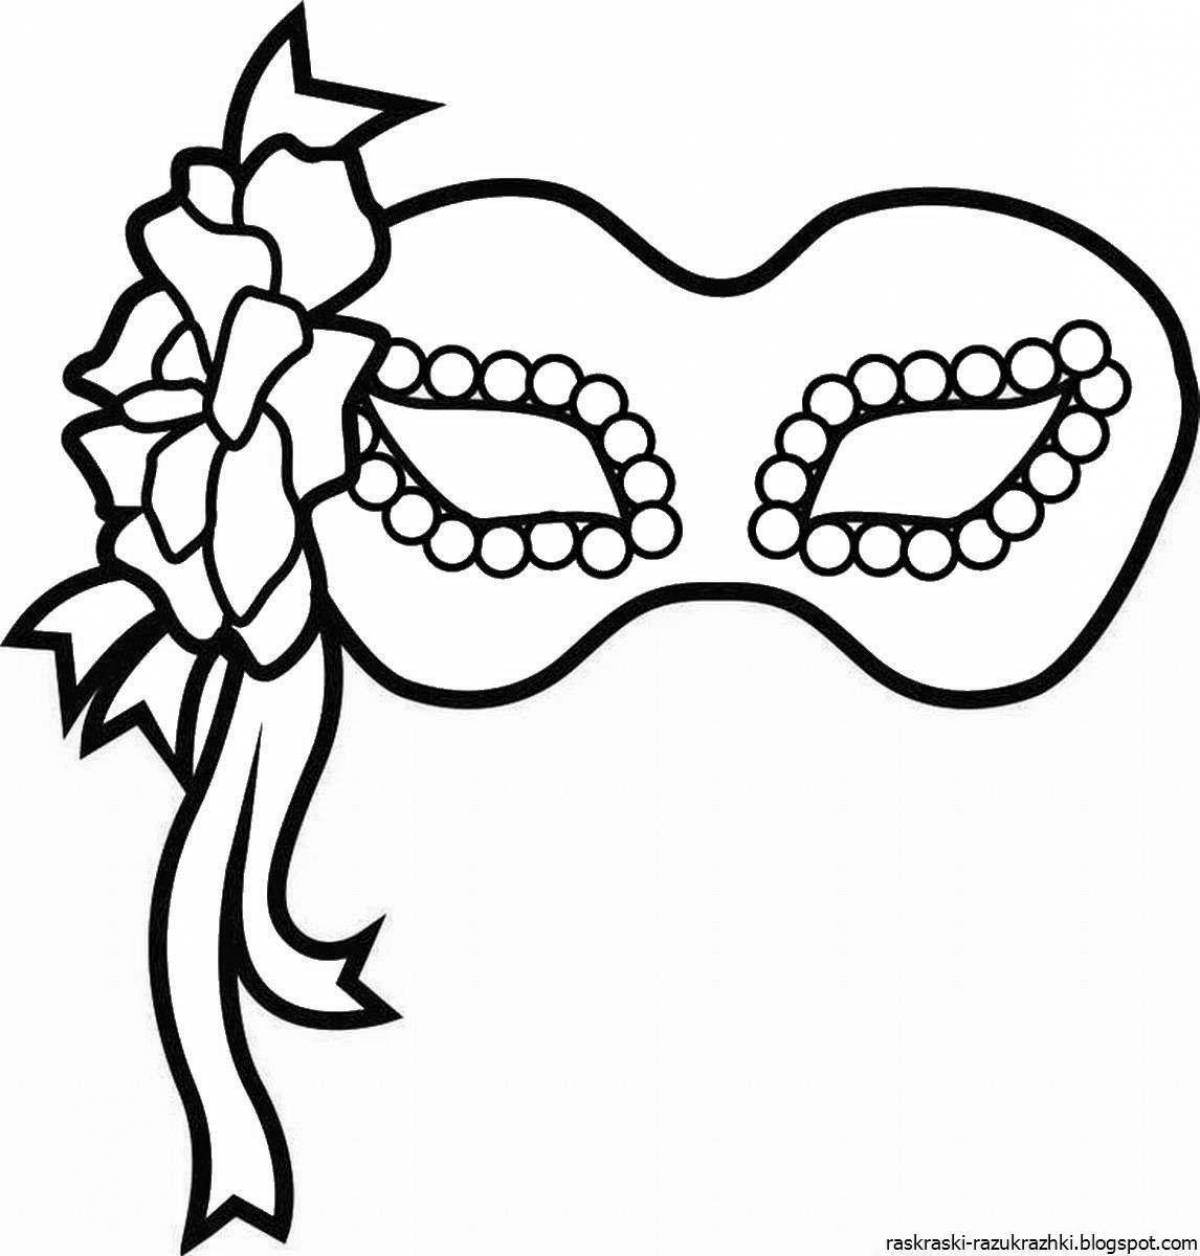 Coloring page joyful theatrical mask